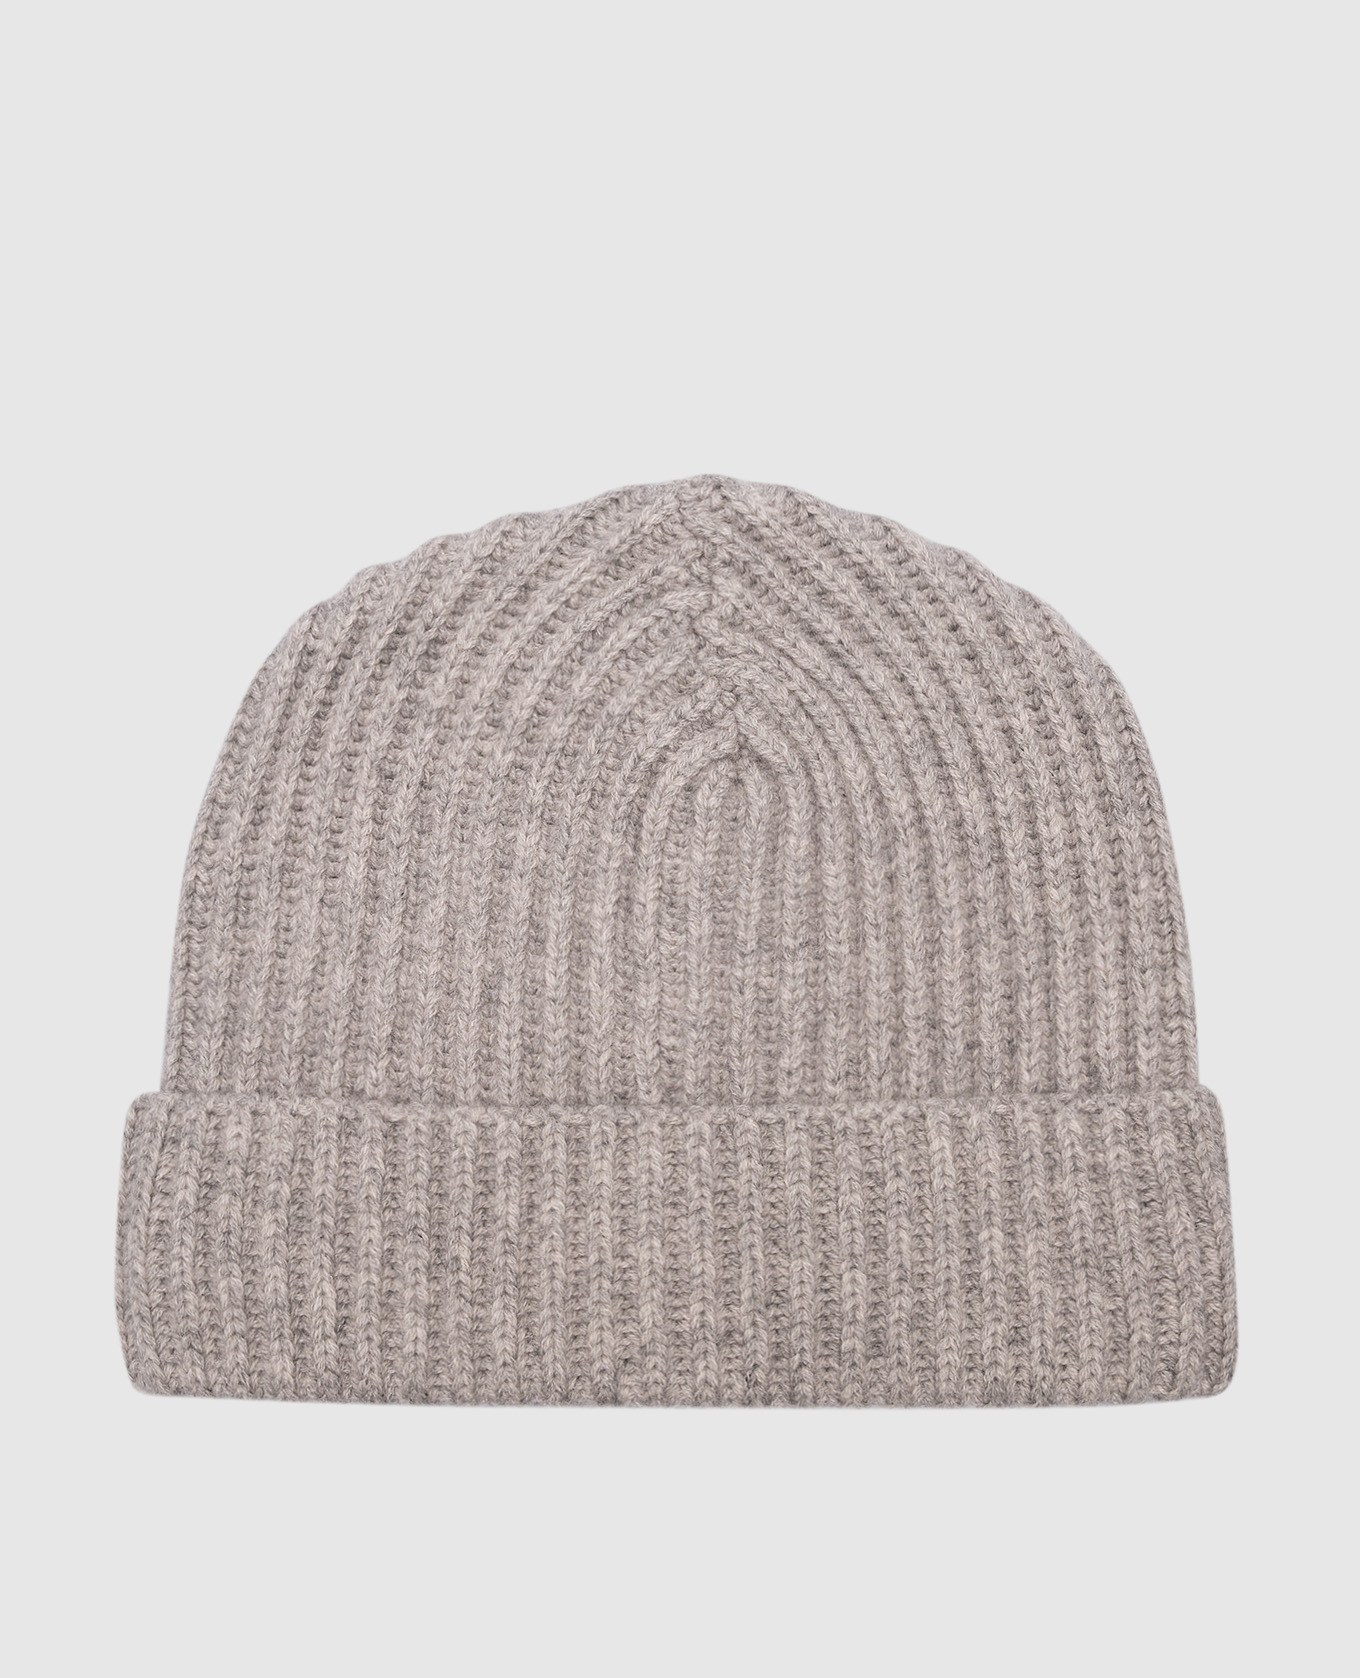 Gray cashmere hat